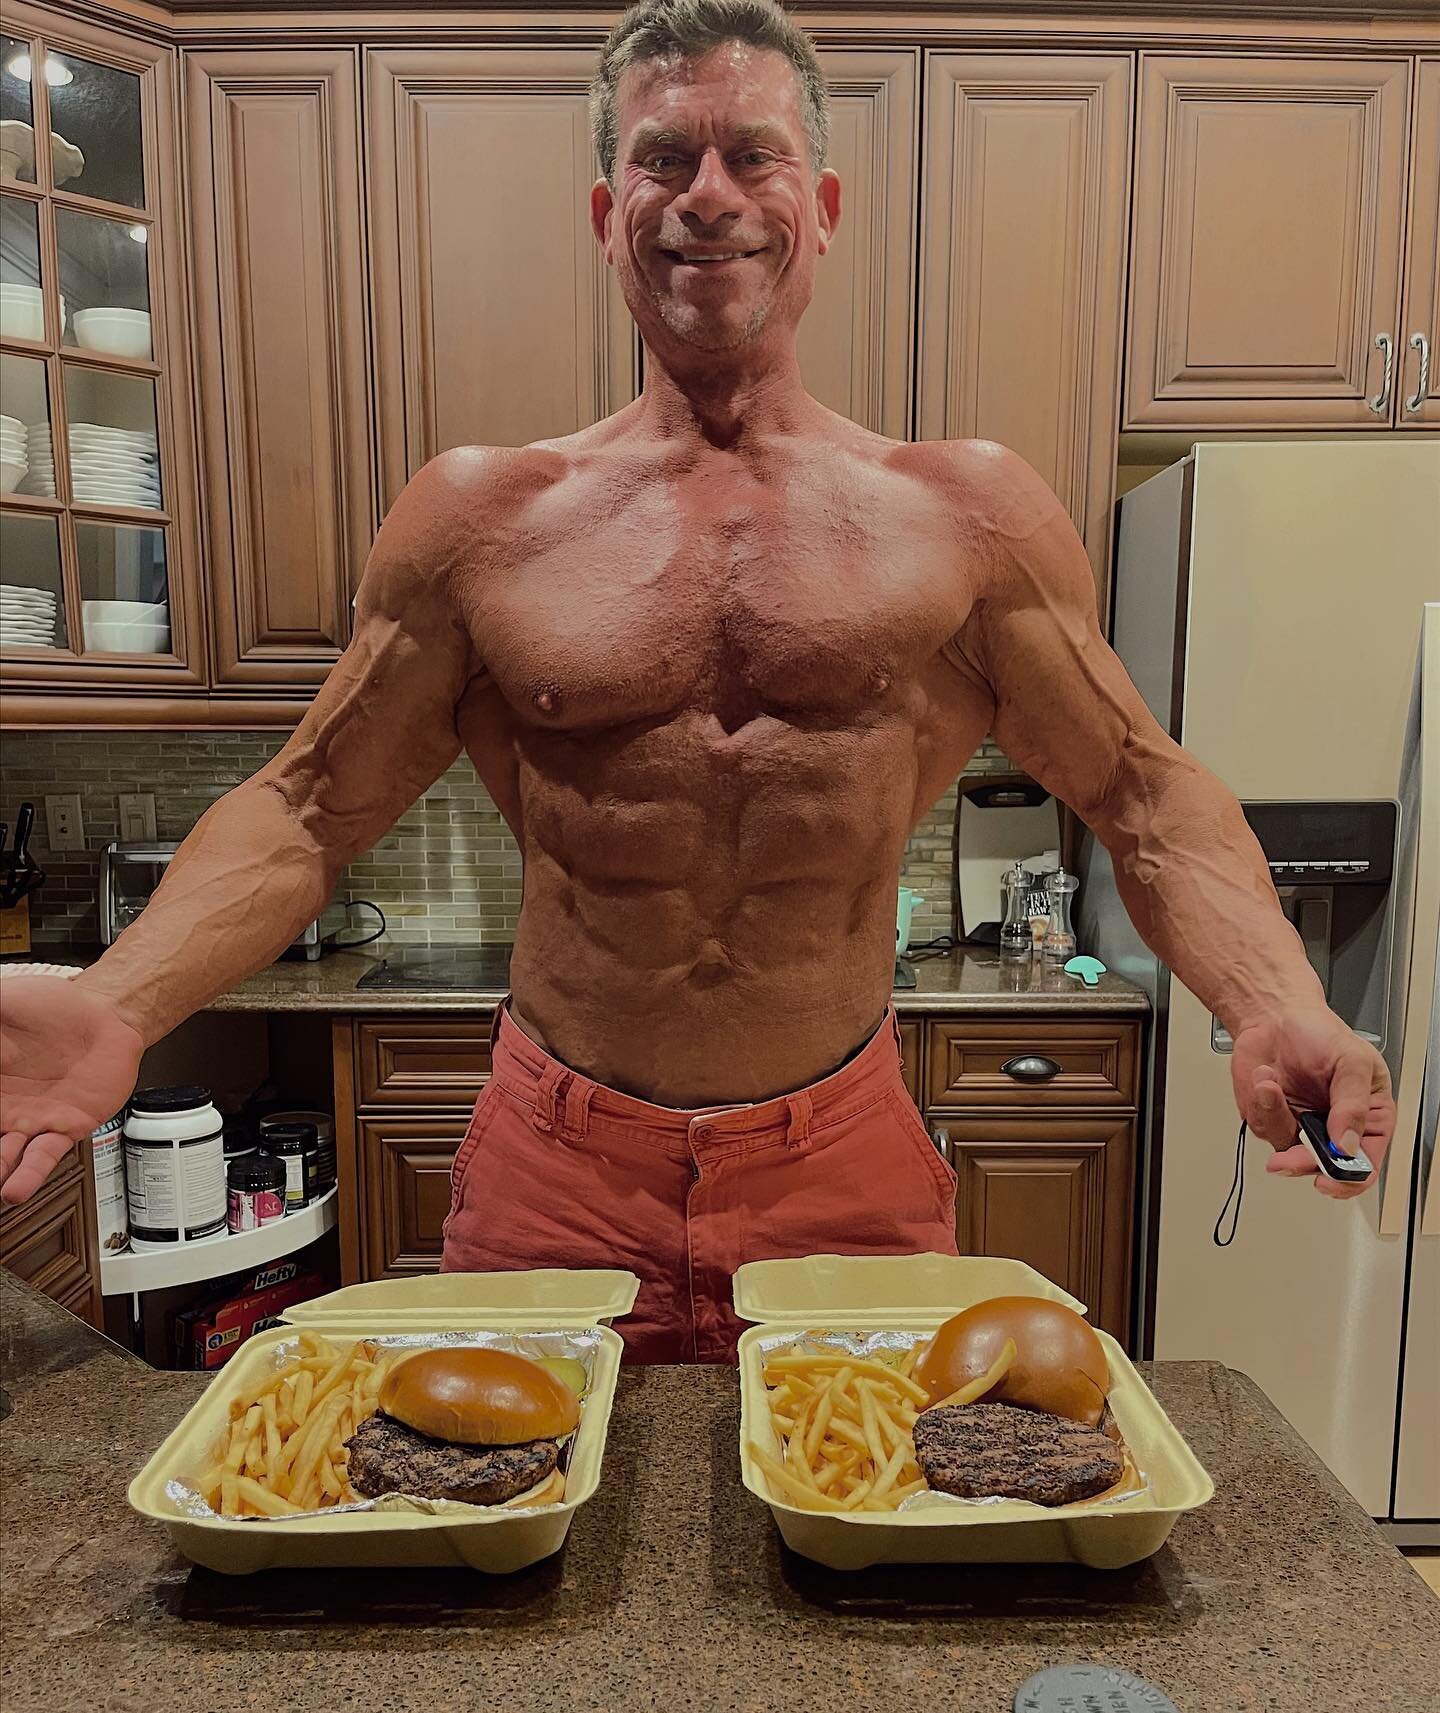 #mondaymotivation 👏🏼 THIS is how you want to be coming into a show!🍔🍟 Our IFBB PRO @mikesamitt will be hitting the Master&rsquo;s Pro Stage in Pittsburgh next week! 

Mike is currently doing 25 minutes of cardio (a leisurely outdoor walk) daily a